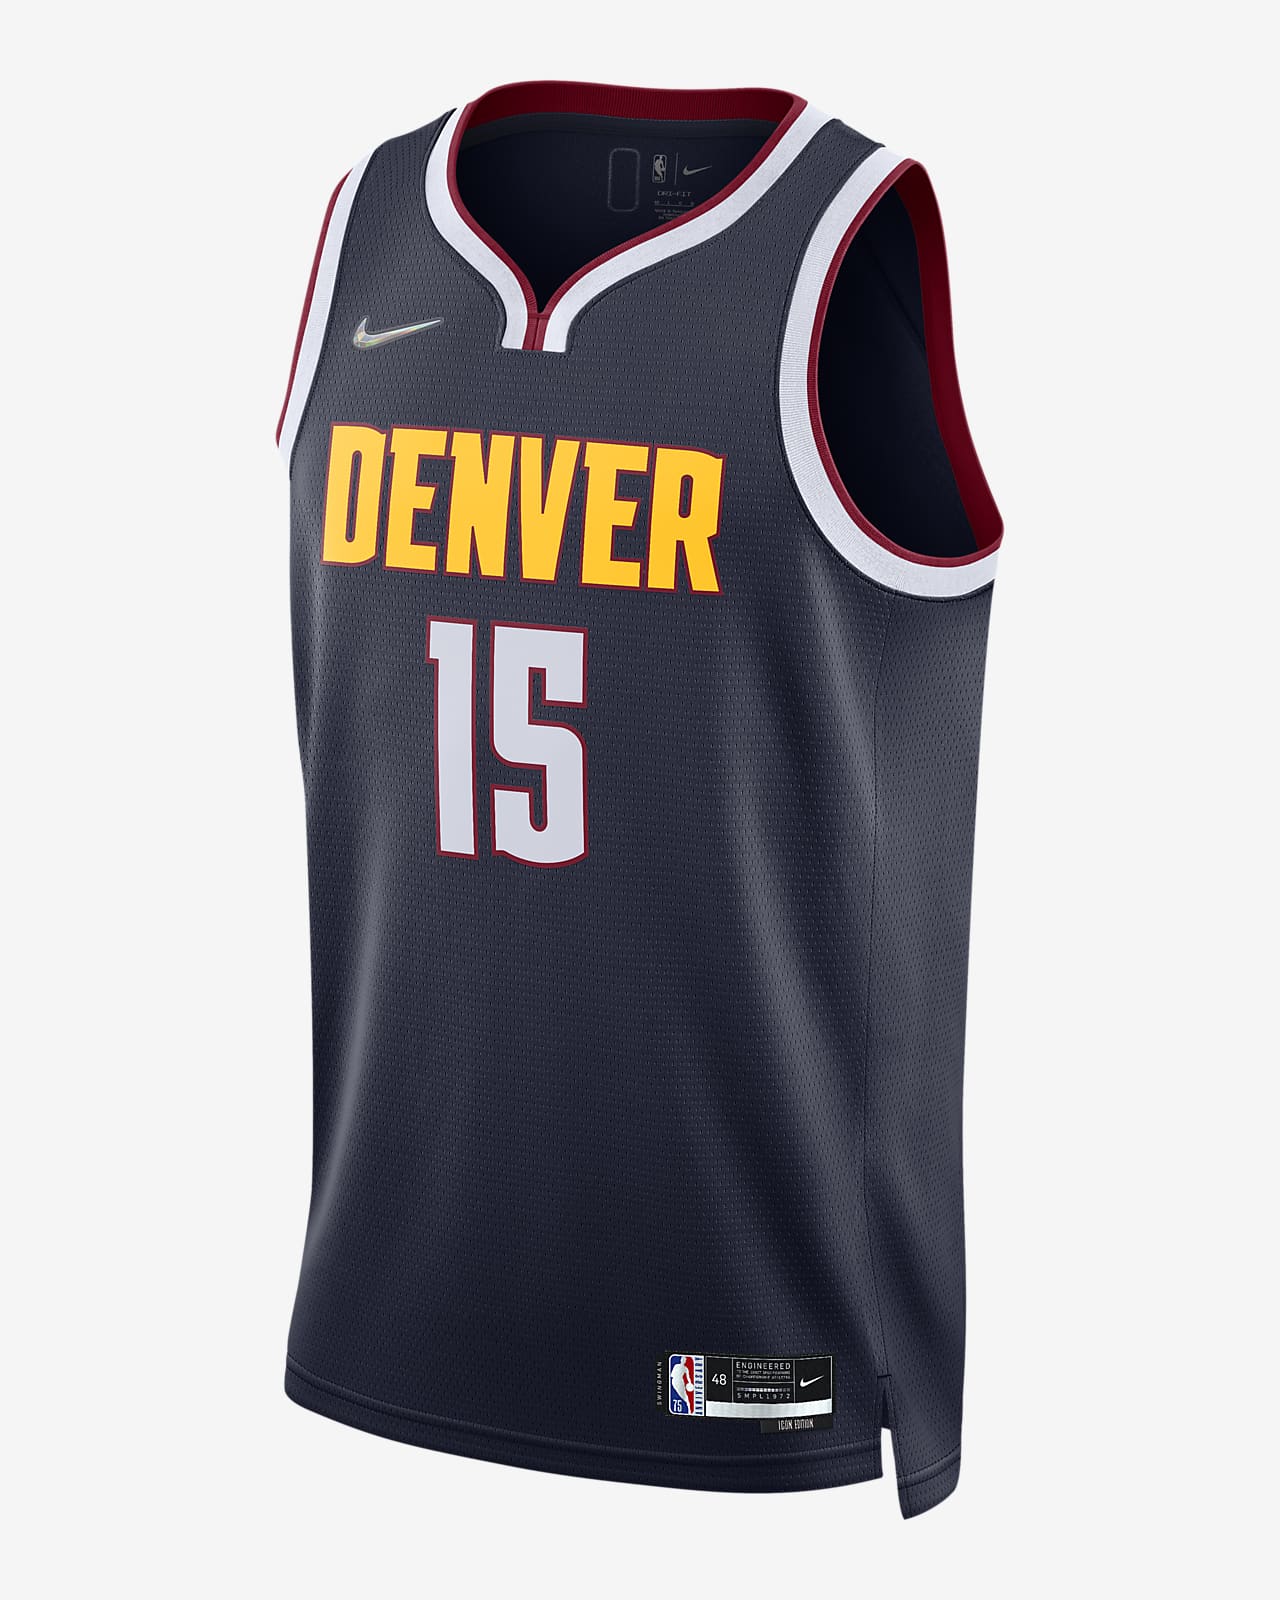 all denver nuggets jerseys,OFF 64%,www.concordehotels.com.tr